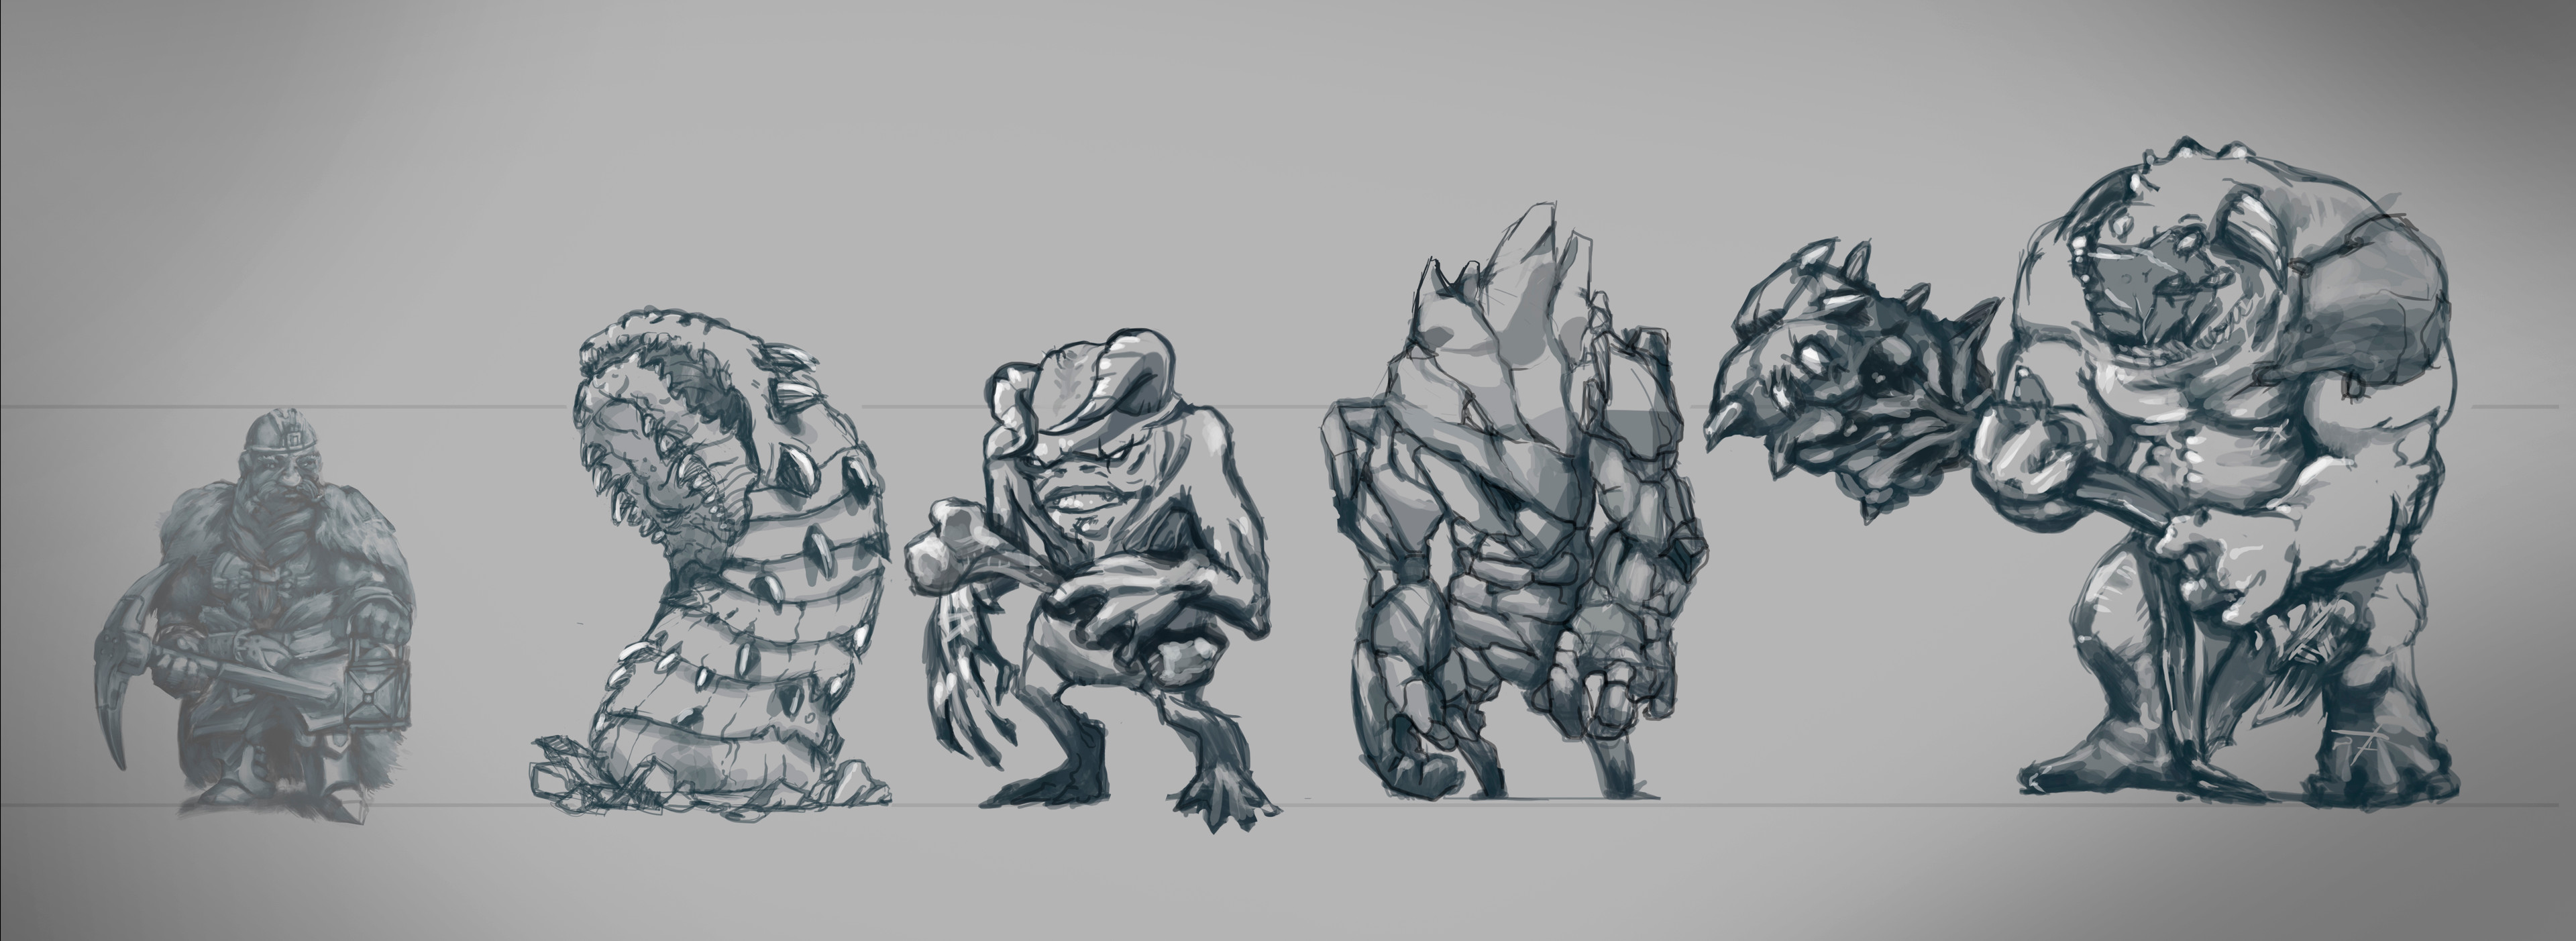 Monster characters concept art